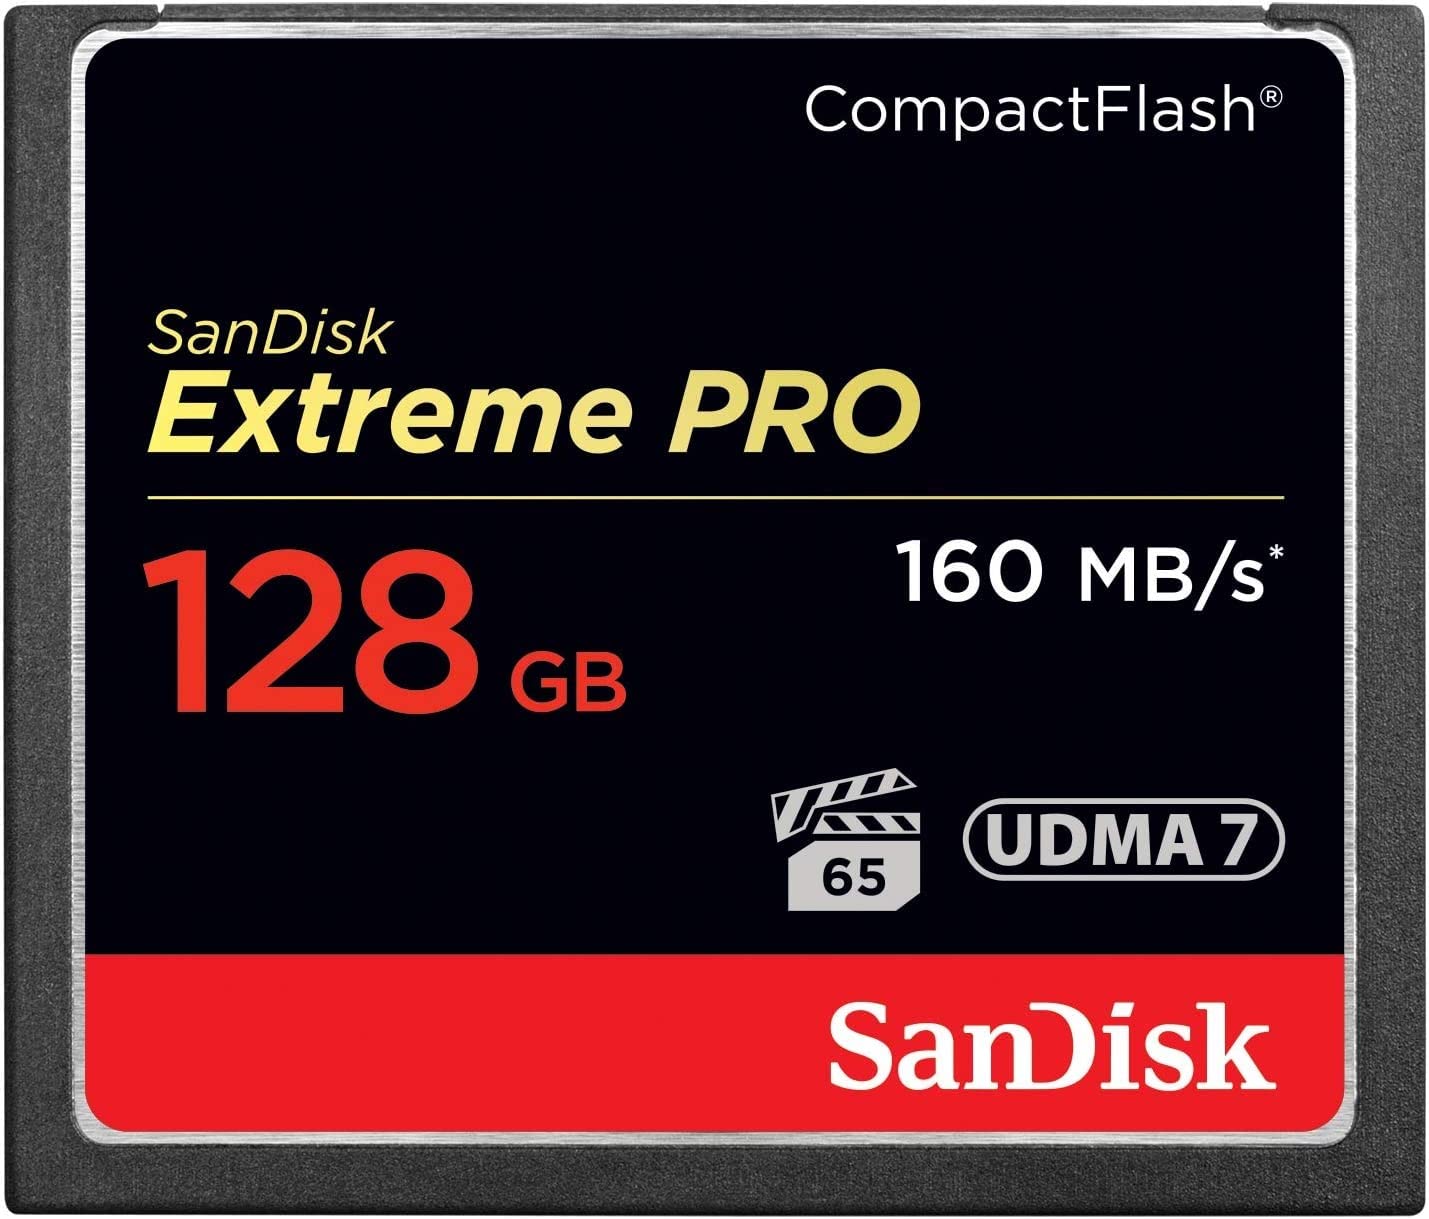 Compact Flash Extreme Pro 128gb Sandisk Sdcfxps 128g X46 619659102500